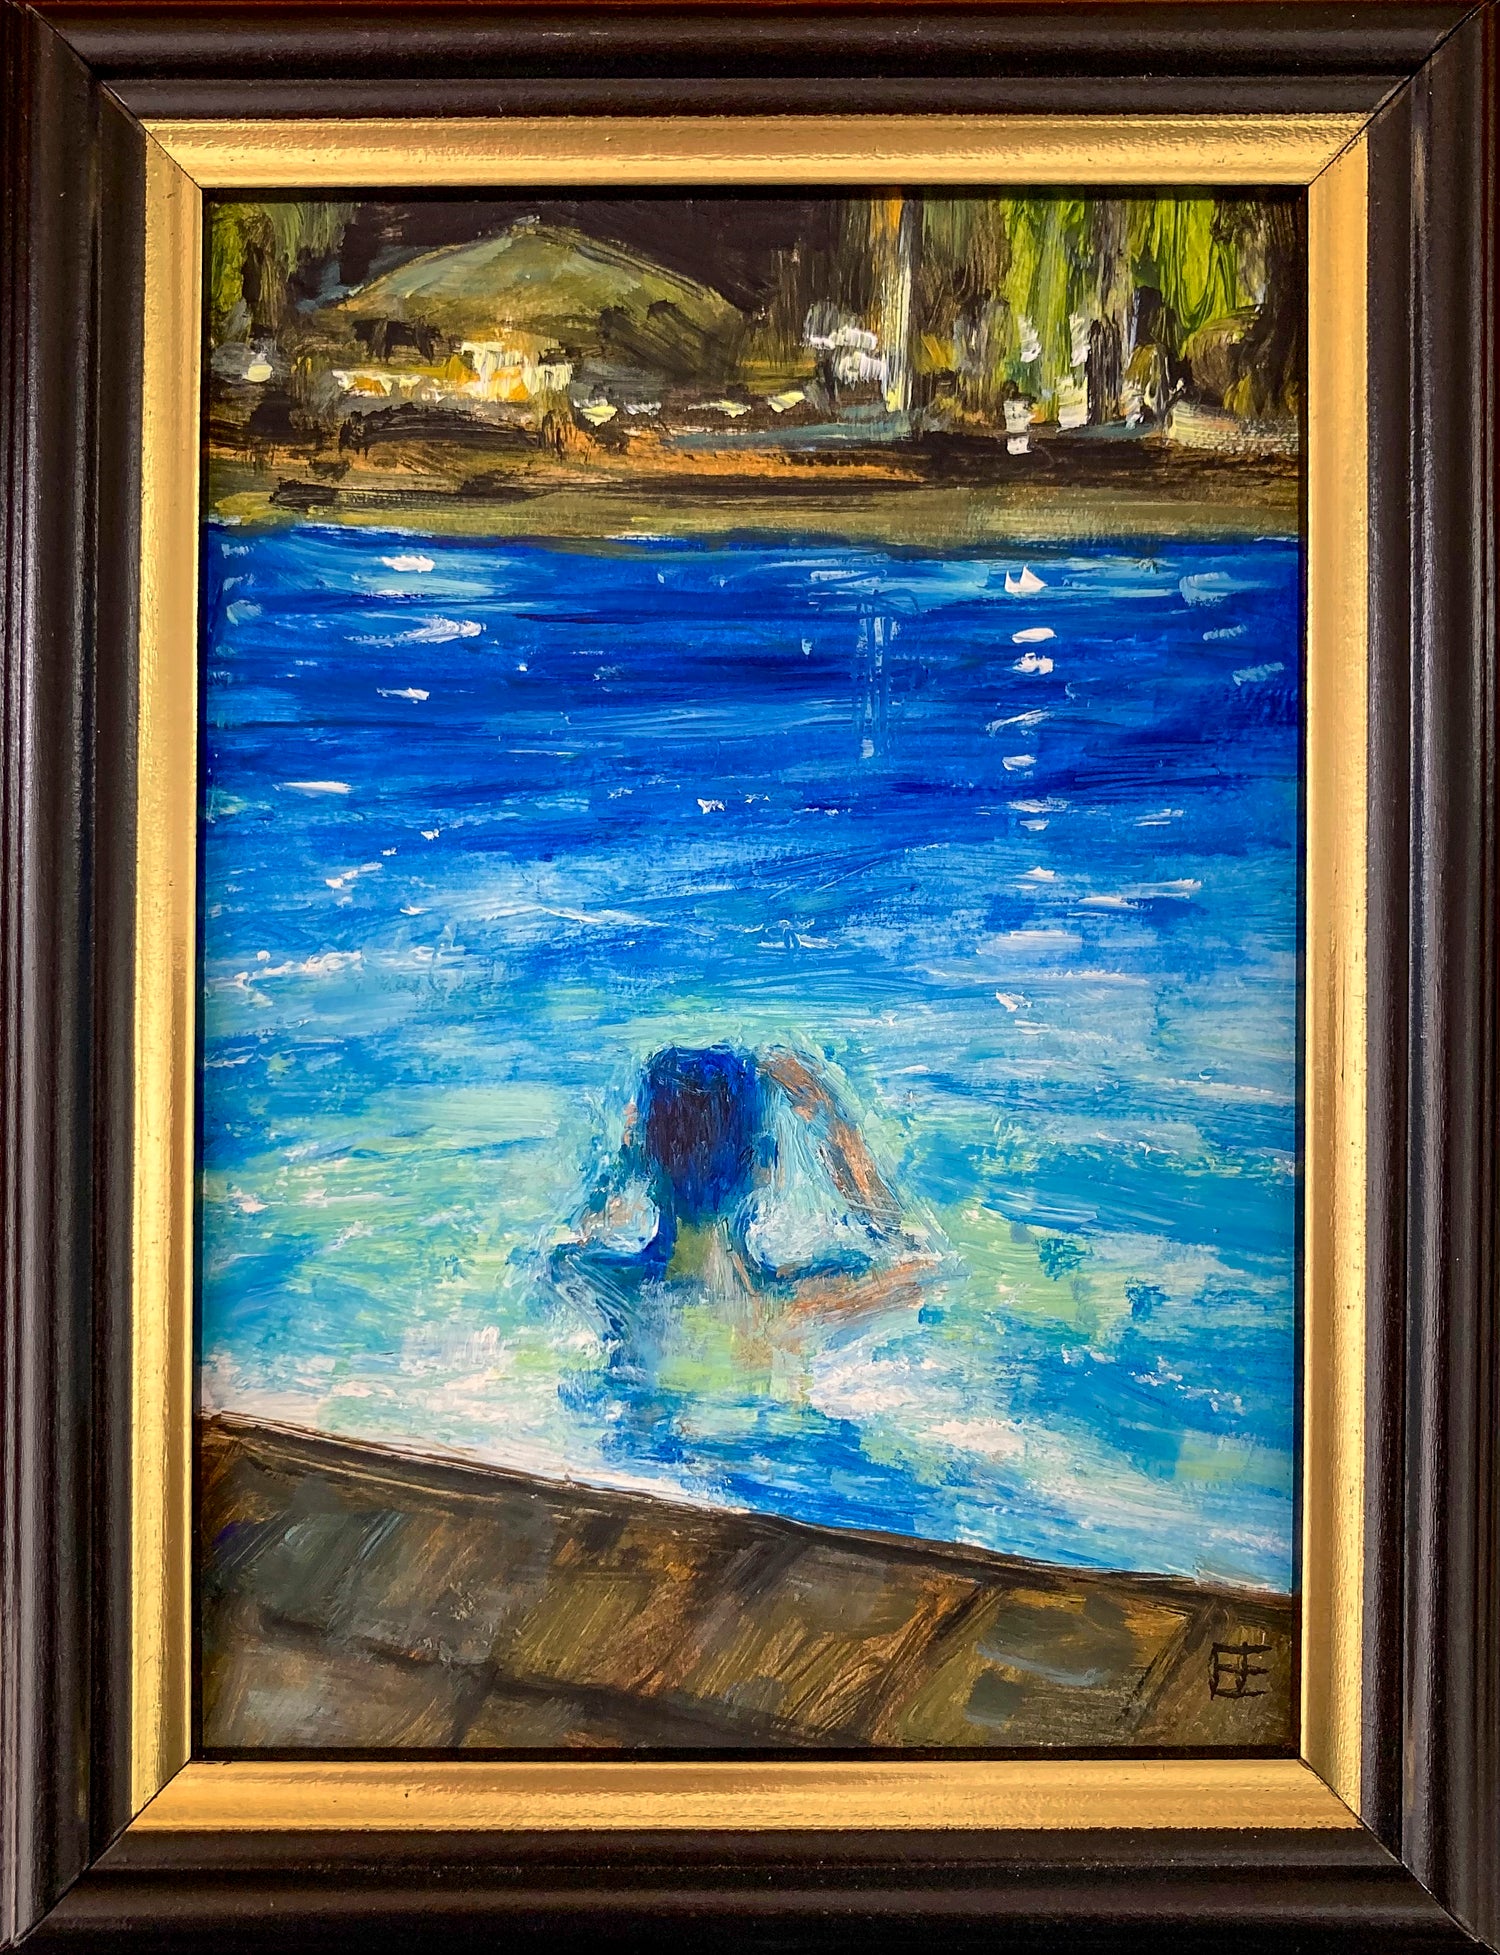 Colorful oil painting on paper; back view of person in pool at night; vibrant blues and impression of lights and umbrella in background; 5"x7" image with dark wood frame with gold gild inlay; title - In It; artist E.E. Jacks